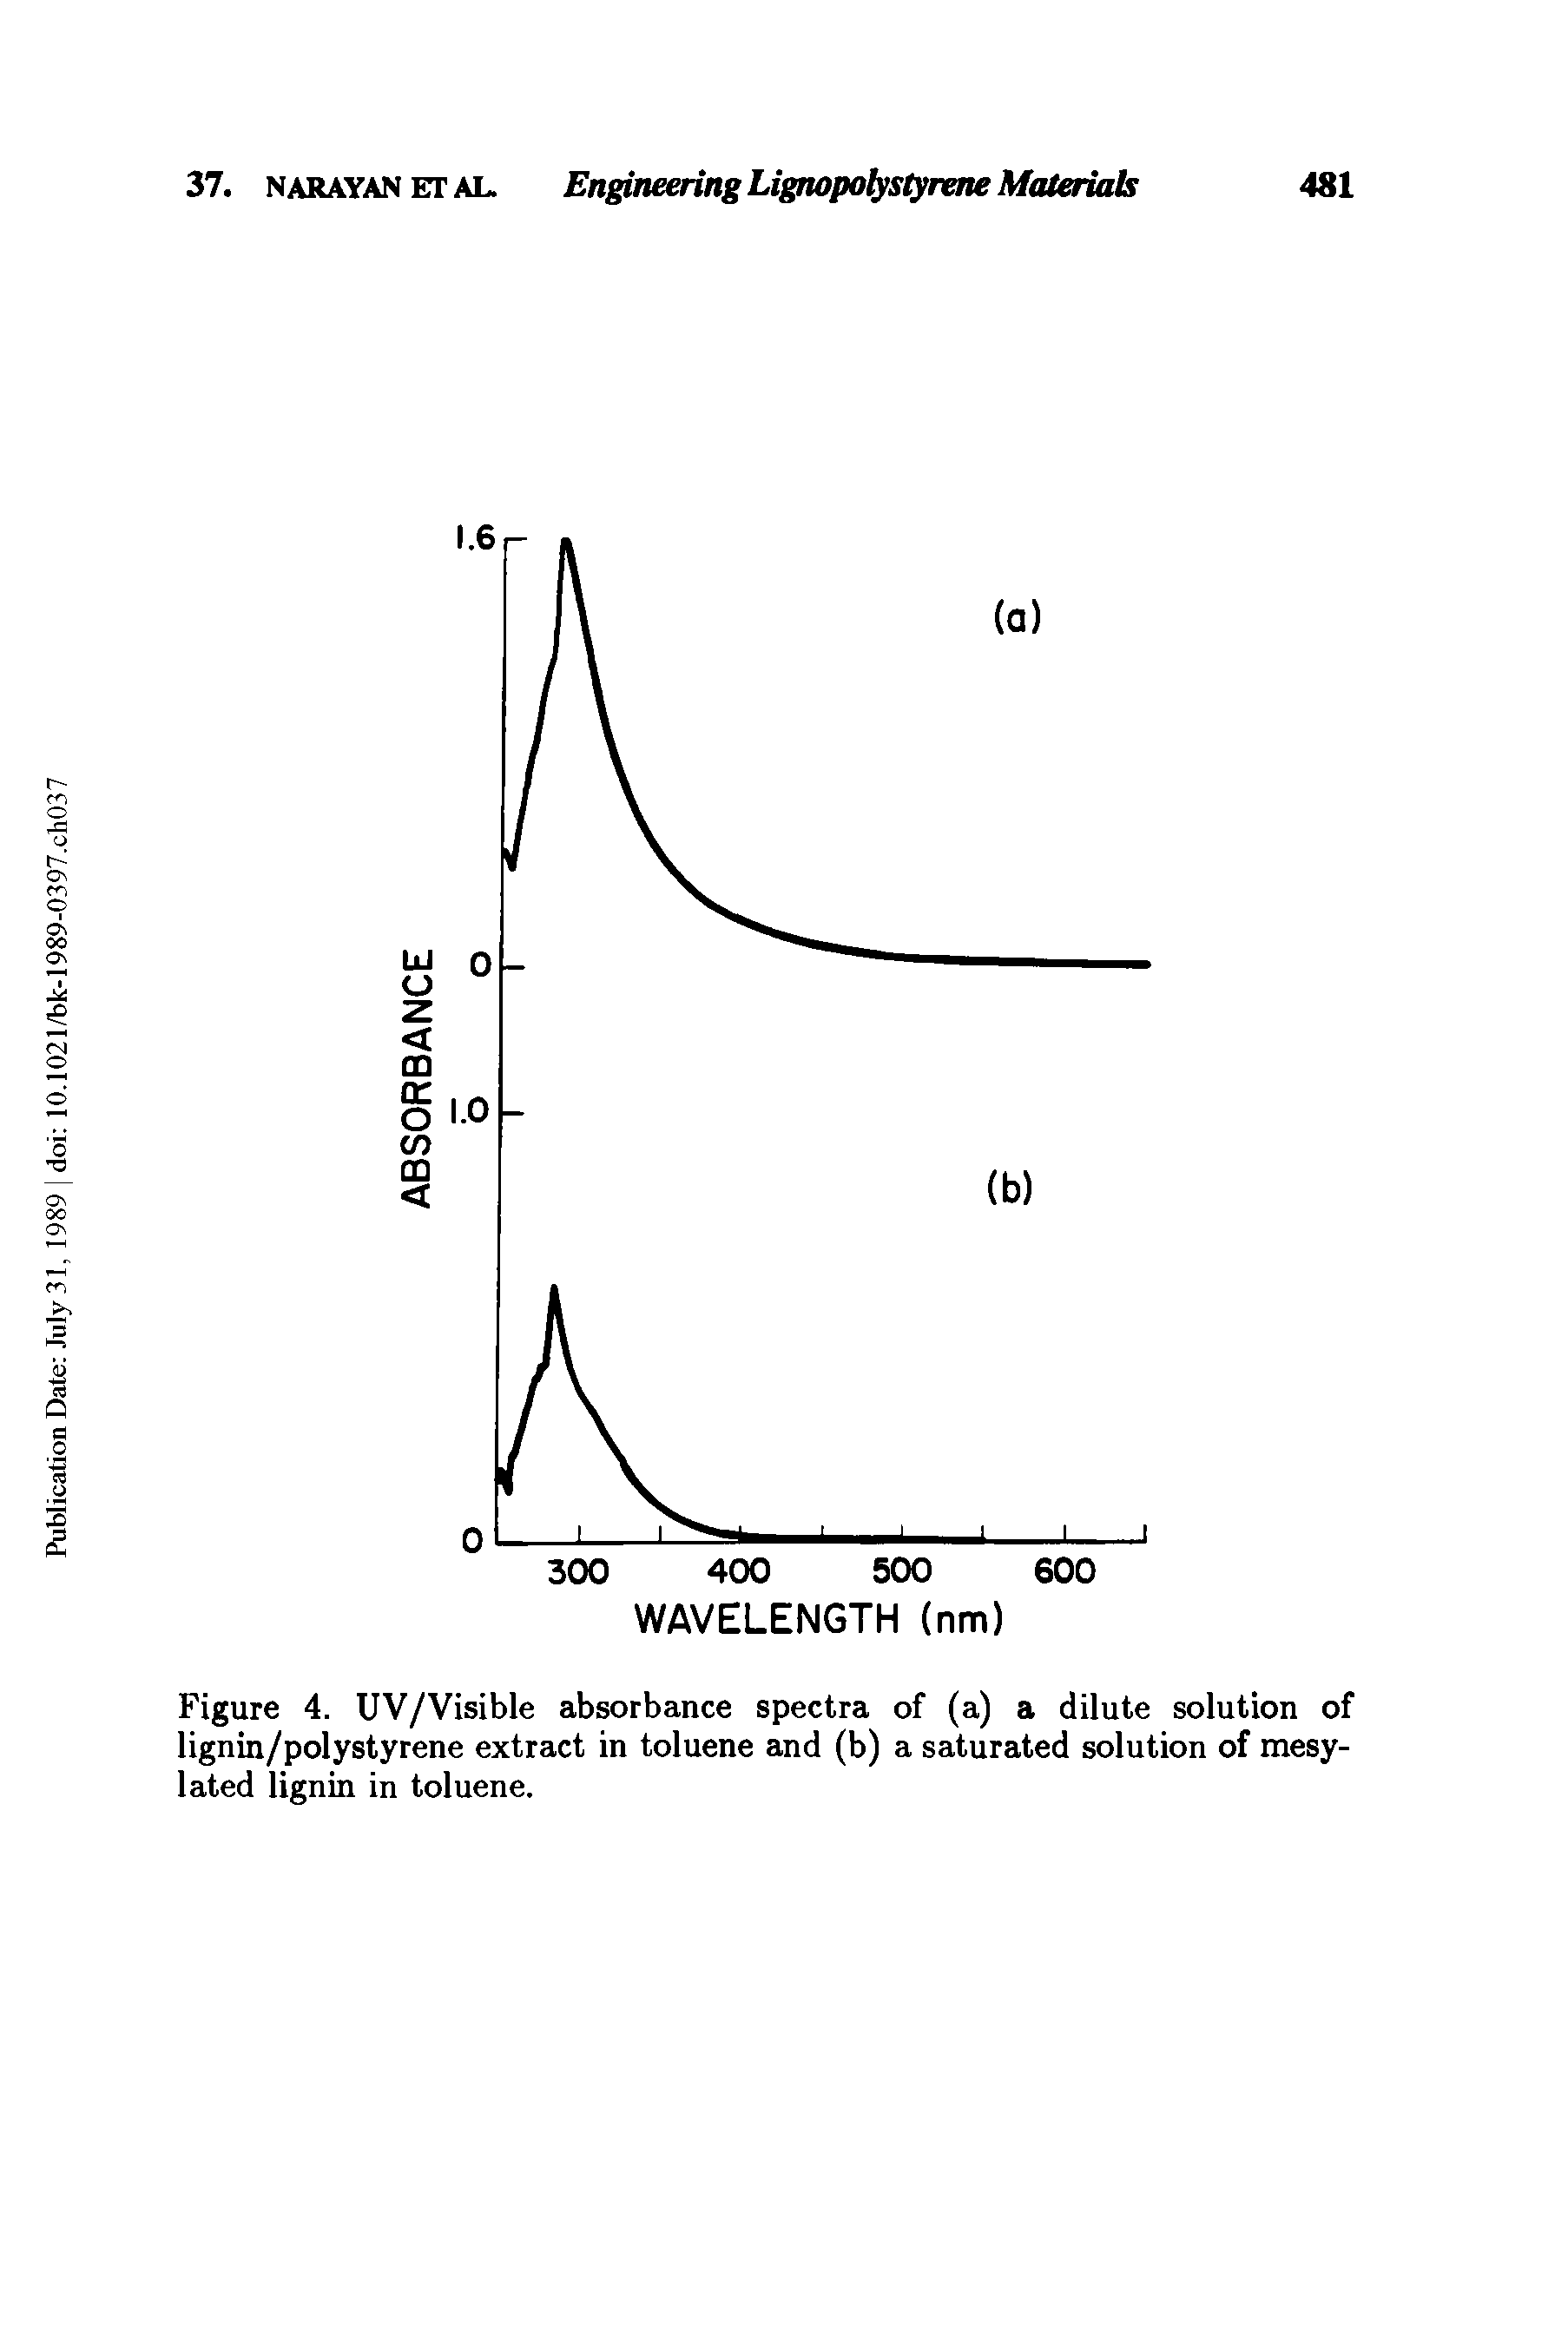 Figure 4. UV/Visible absorbance spectra of (a) a dilute solution of lignin/polystyrene extract in toluene and (b) a saturated solution of mesy-lated lignin in toluene.